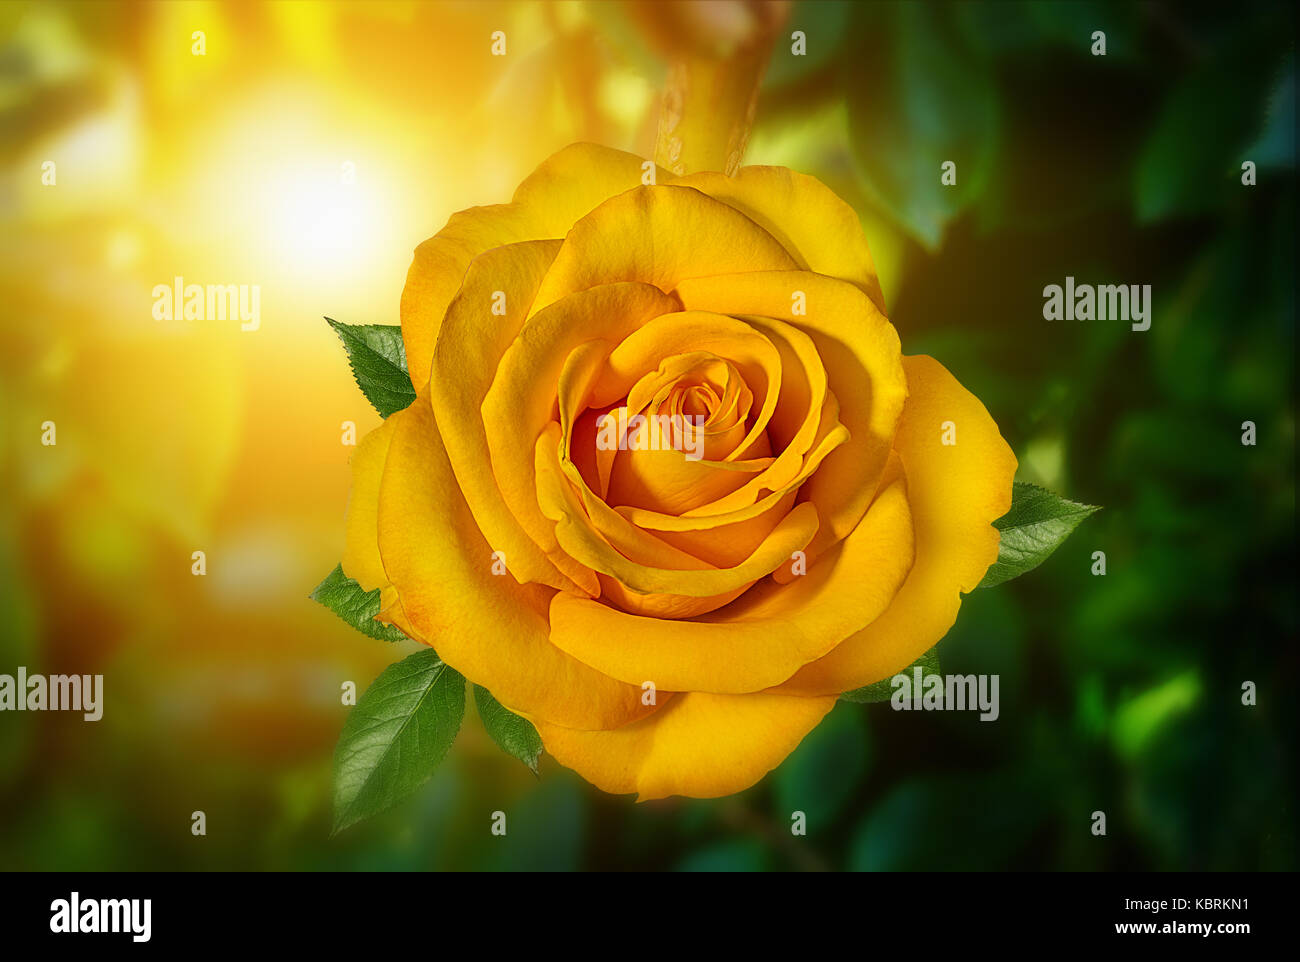 yellow rose with abstract sunlight and bokeh for background Stock ...